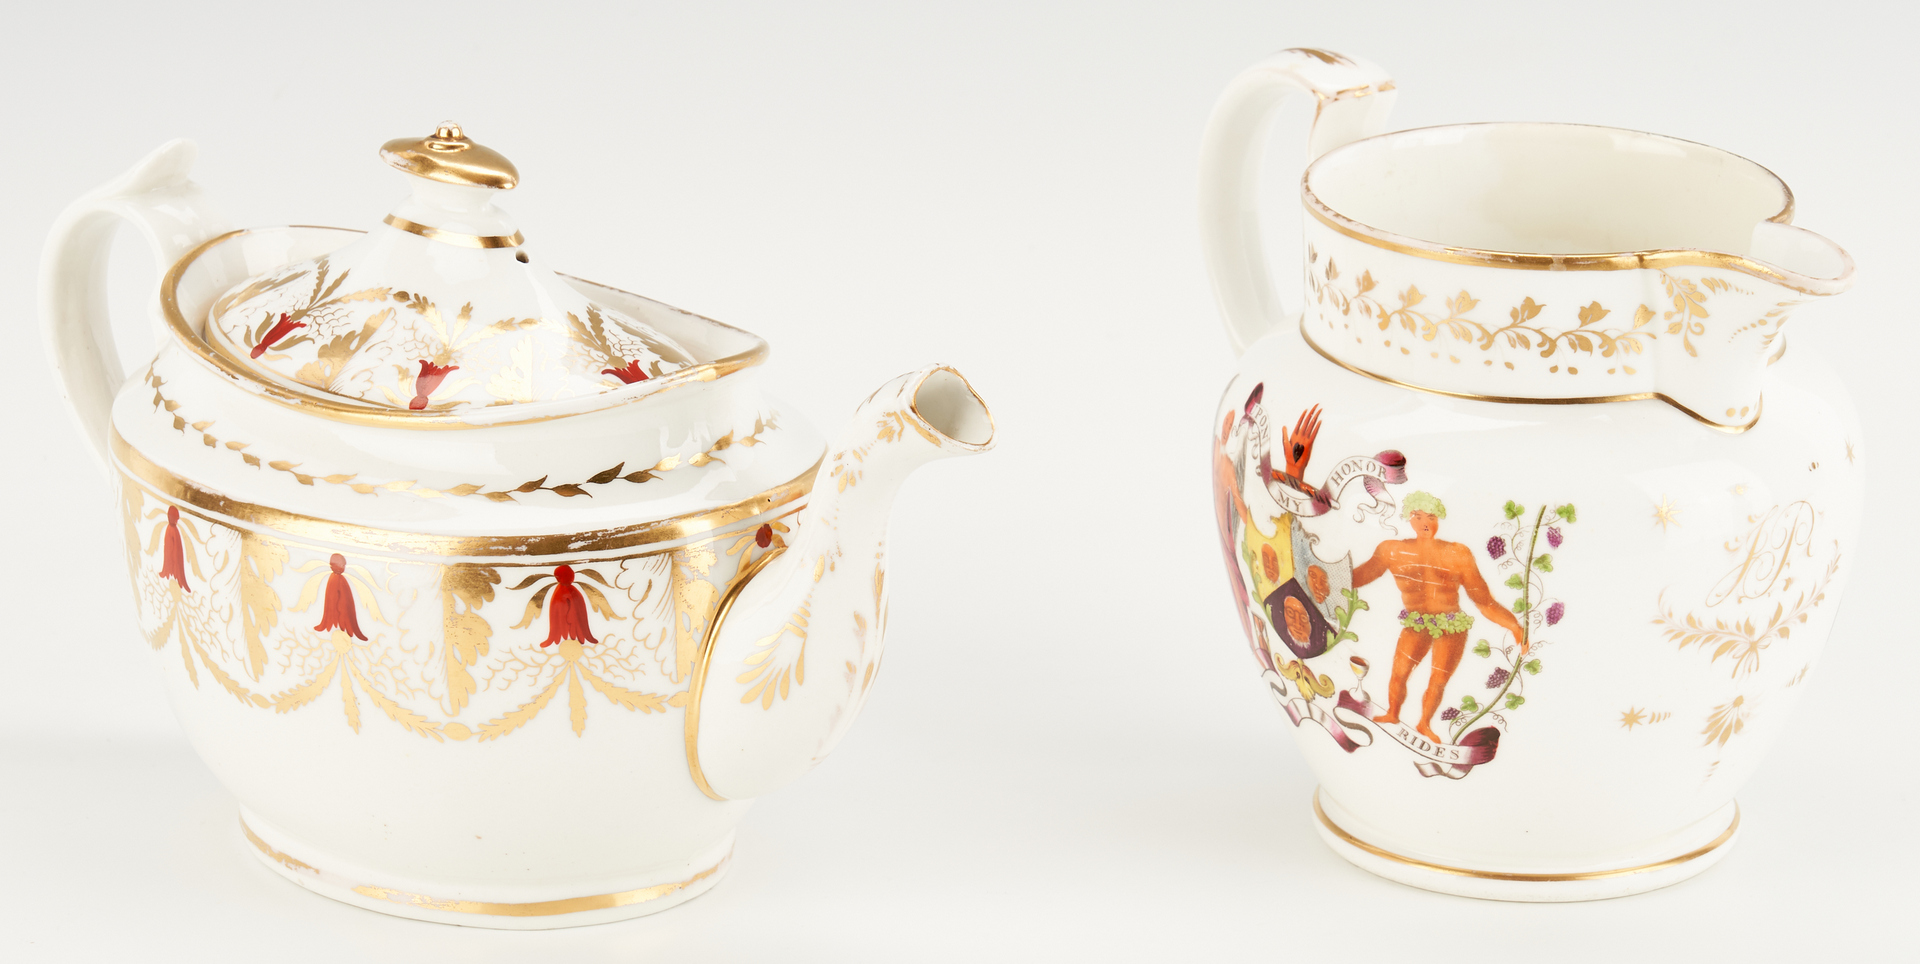 Lot 458: 6 English Ceramic items including Soft Paste Porcelain Teapots and Armorial